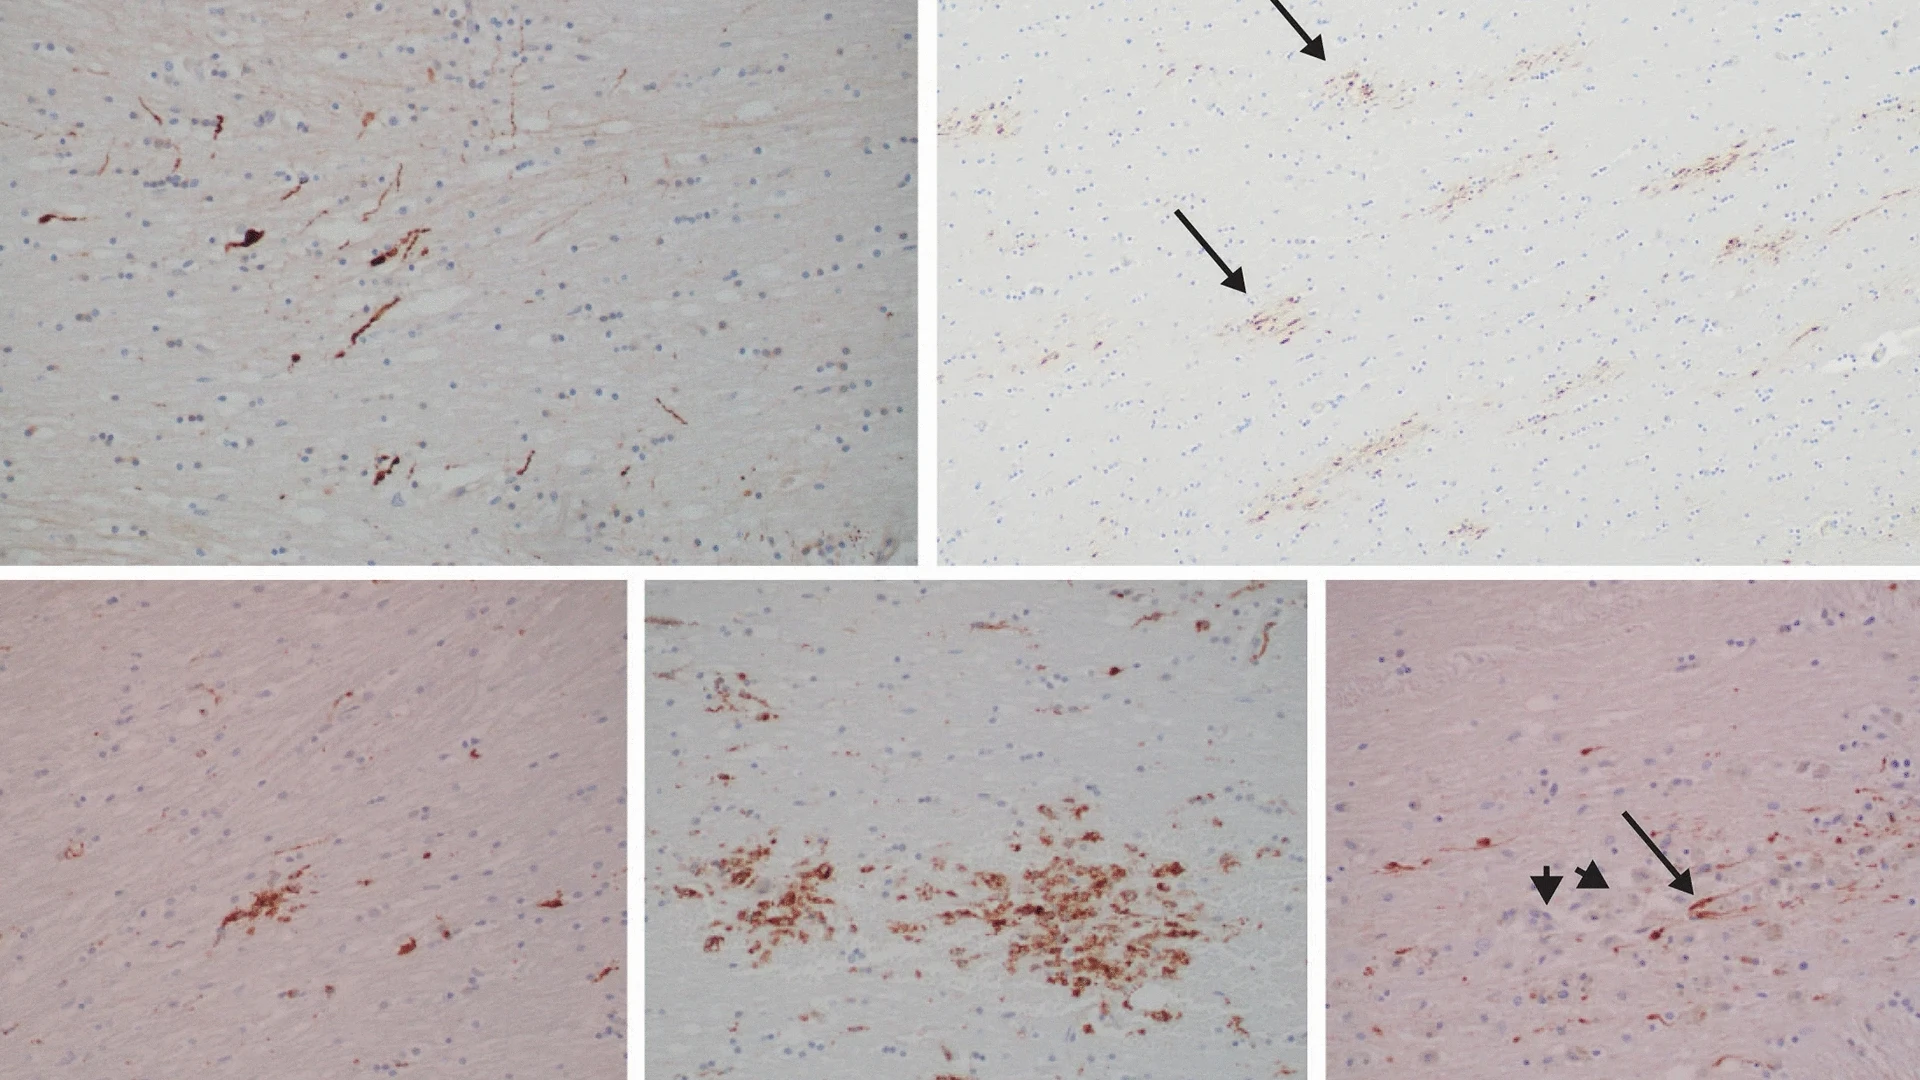 In microscopic inspections of the corpus callosum, internal capsule, and dorsolateral brainstem, acute diffuse axonal injury was found, with CD68-immunoreactive microglia, consistent with post-traumatic brain injury and associated ongoing neuroinflammation and axonal degeneration.